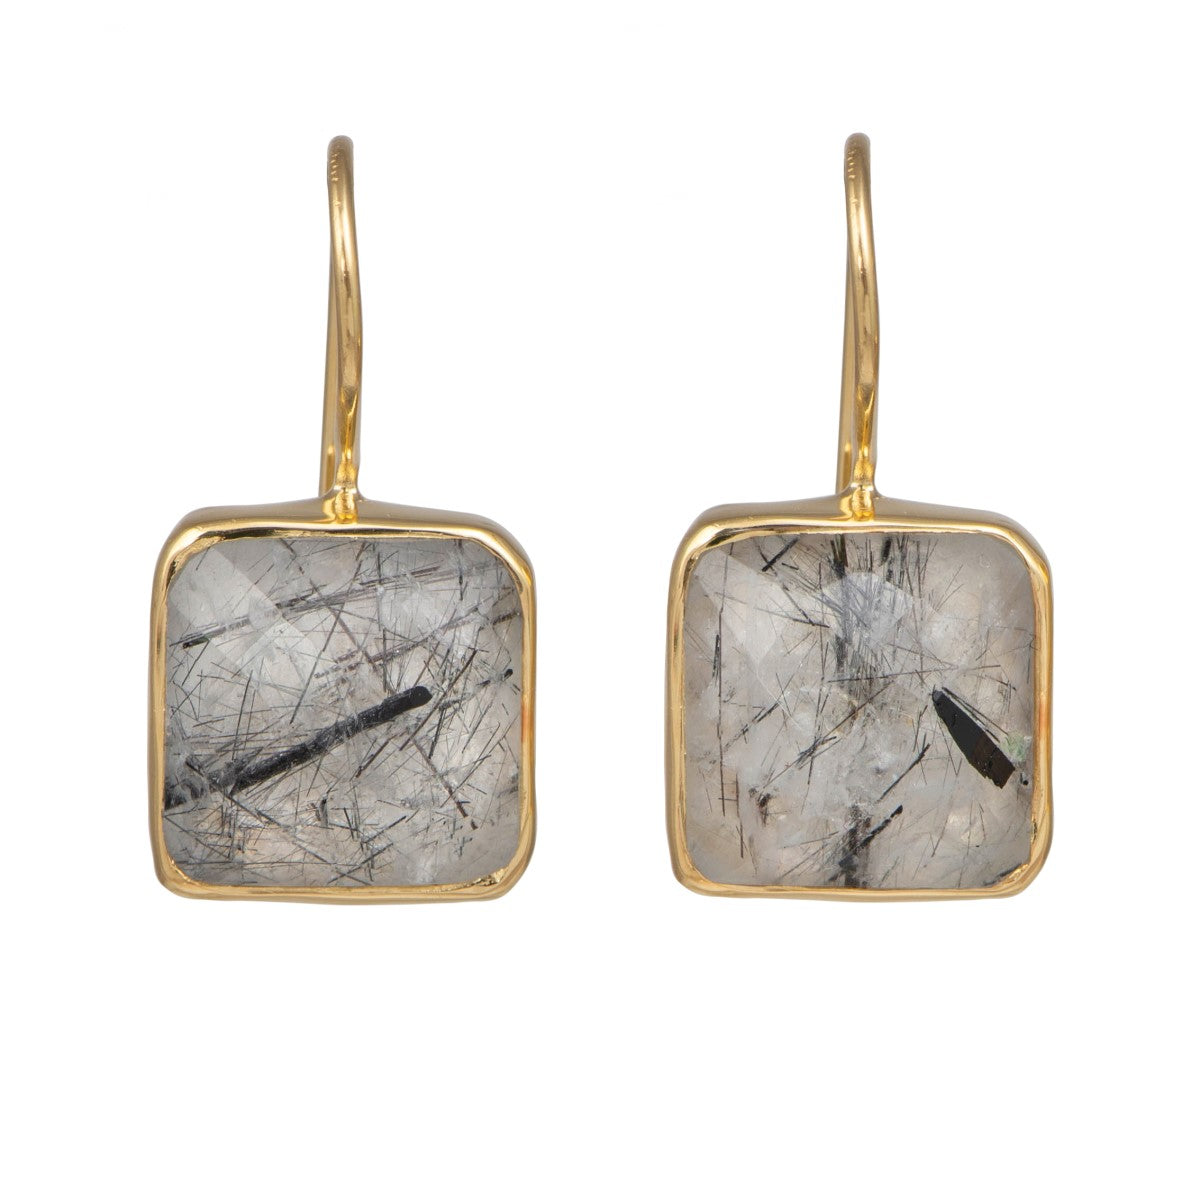 Gold Plated Sterling Silver Square Gemstone Earrings - Black Rutilated Quartz